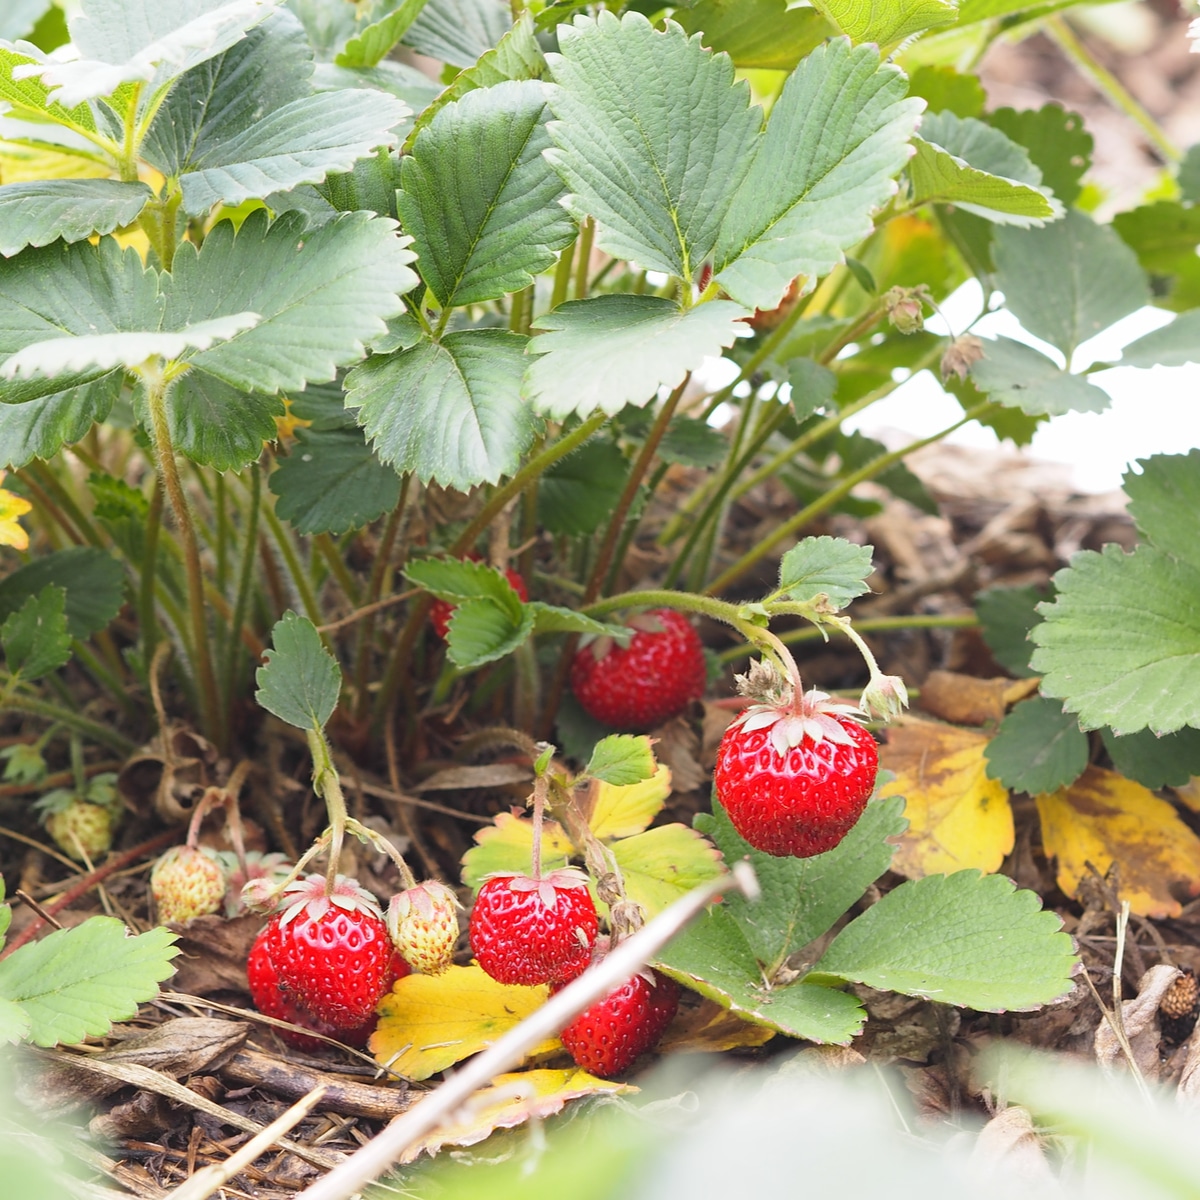 https://strawberryplants.org/wp-content/uploads/What-Causes-Small-Strawberries-featured.jpg